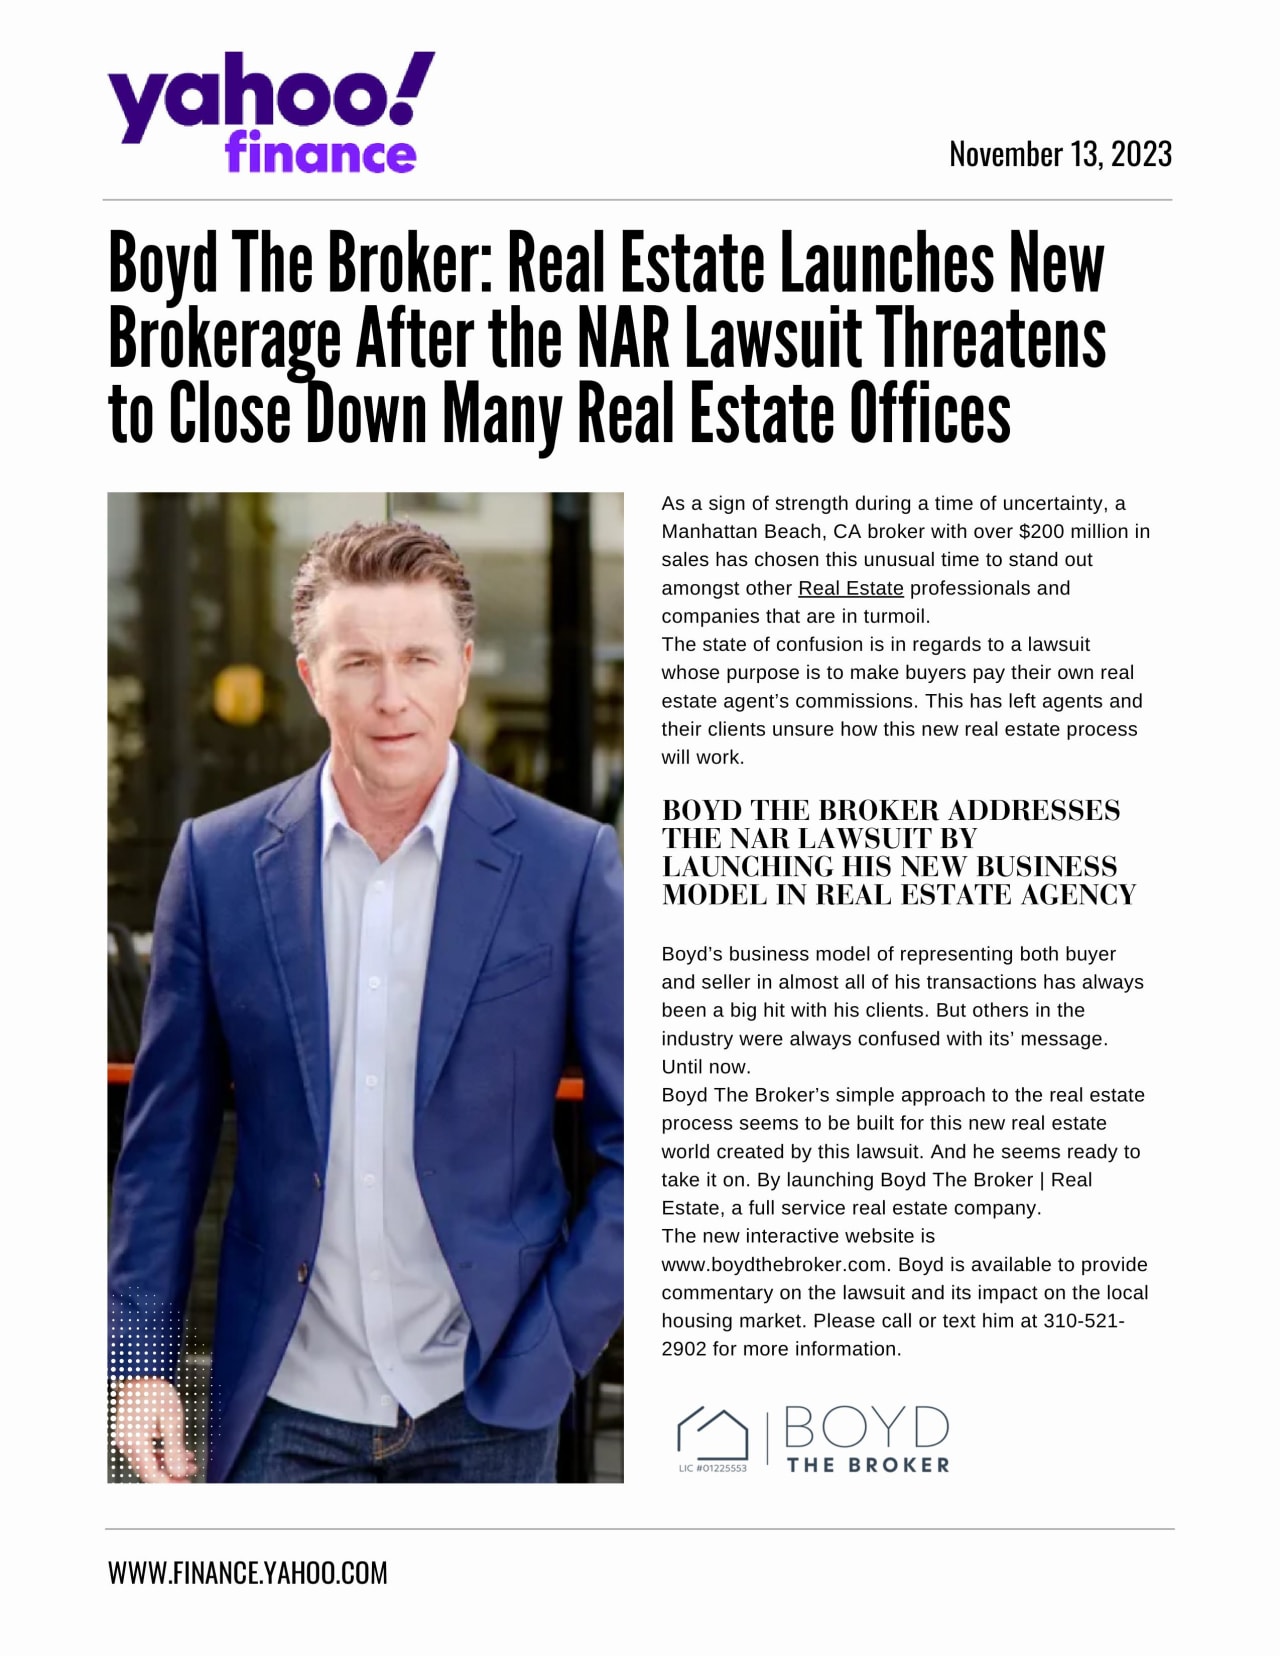 Boyd The Broker Real Estate Launches New Brokerage After NAR Lawsuit